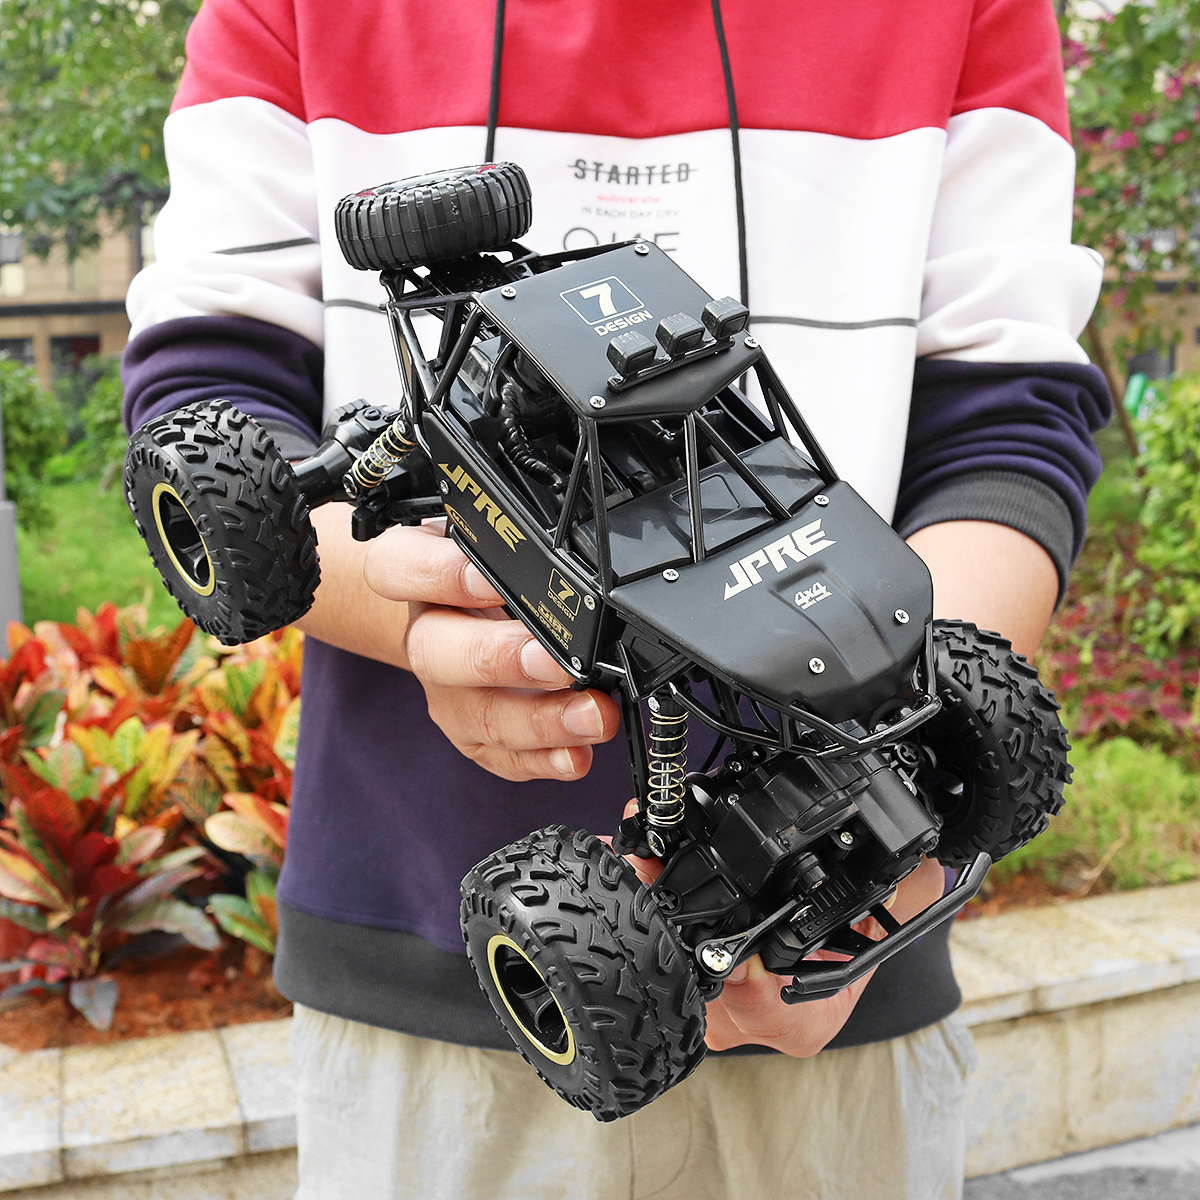 1:16 Alloy Remote Controls Car Monster Trucks, 4WD Climbing RC Cars Off Road, RC Crawler Toys for Boys Kids Gifts - image 9 of 11